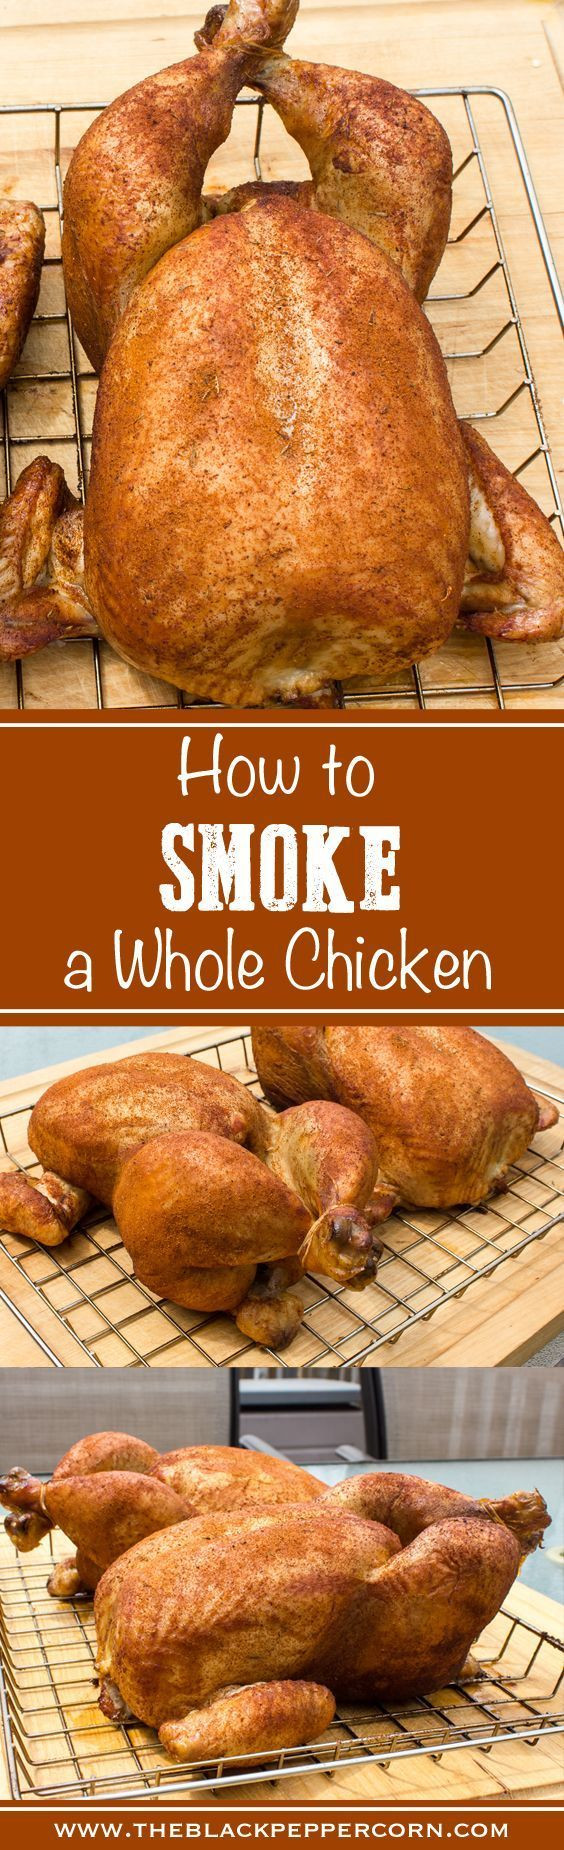 Smoking Whole Chicken In Masterbuilt Electric Smoker
 1309 best BBQ & Smoked Food images on Pinterest